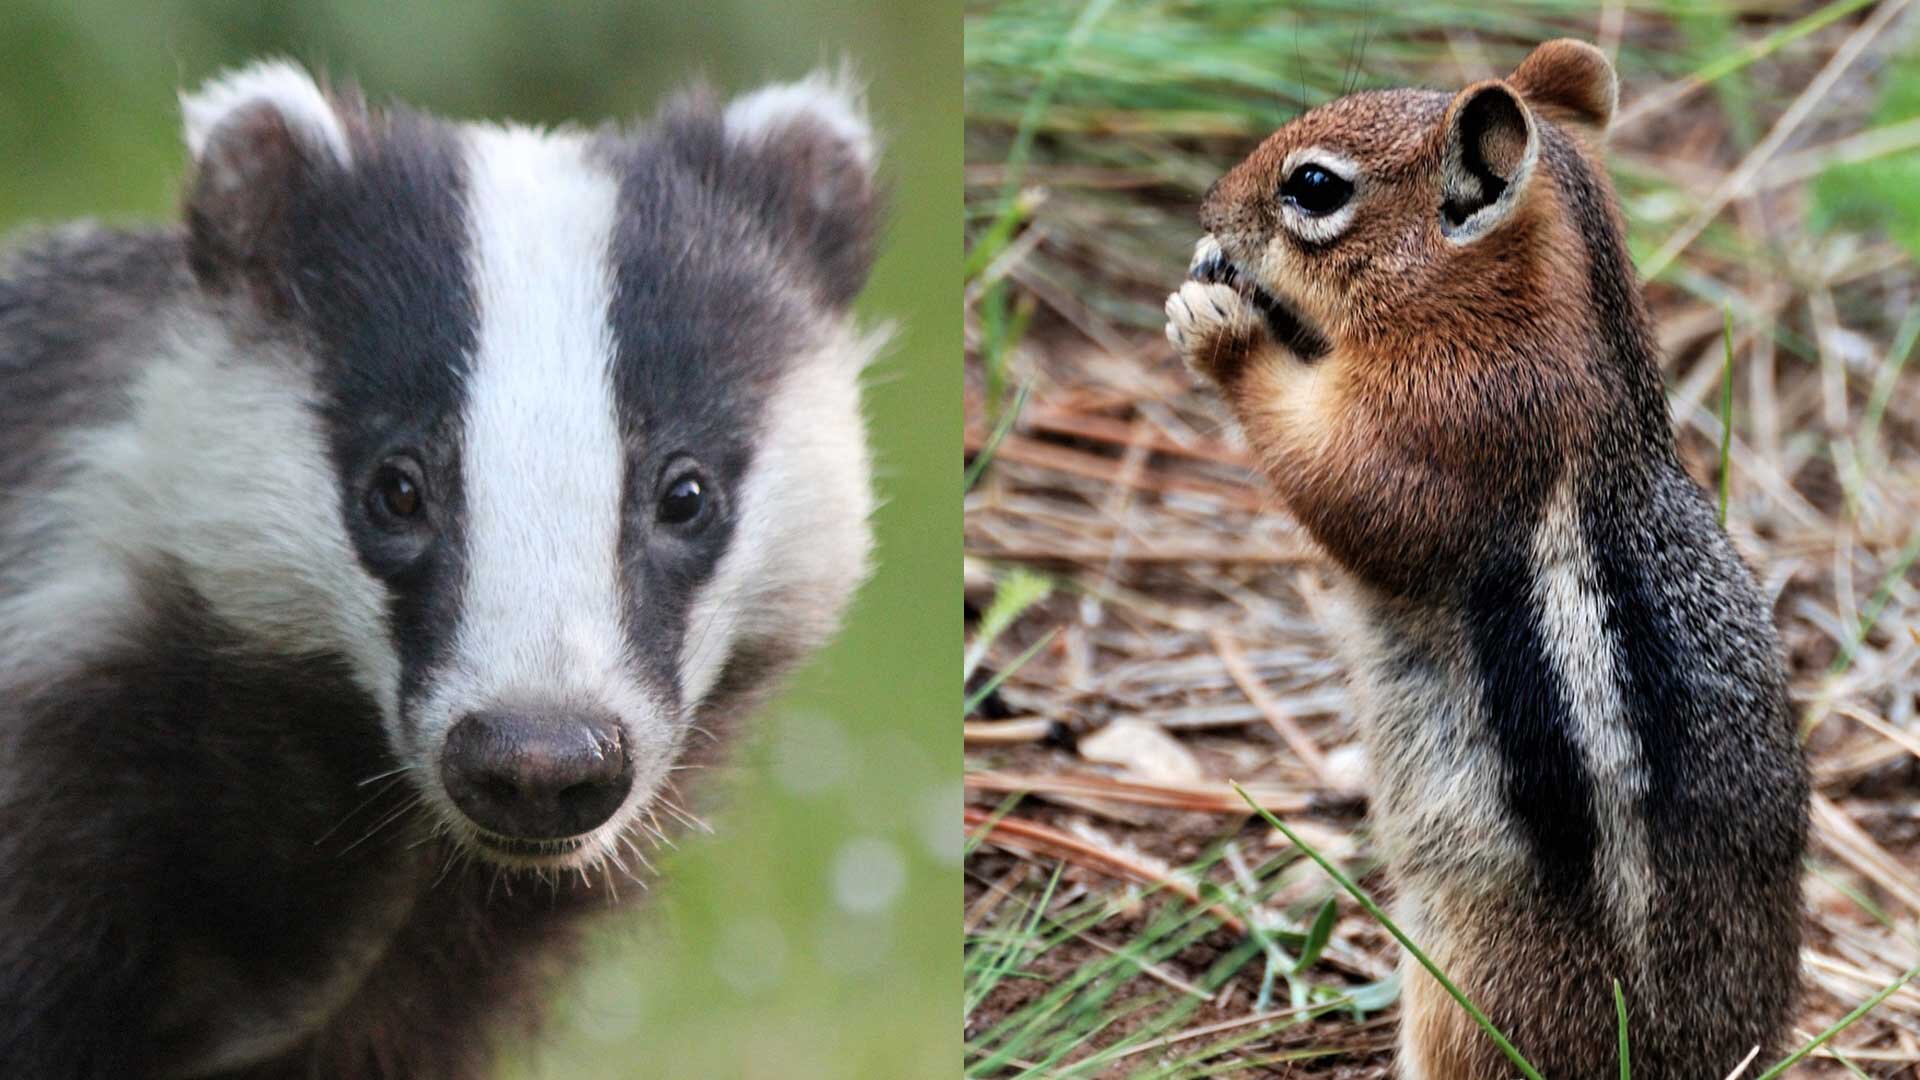 Settling-the-Rivalry--We-Made-a-Real-Badger-Fight-a-Real-Gopher.jpg